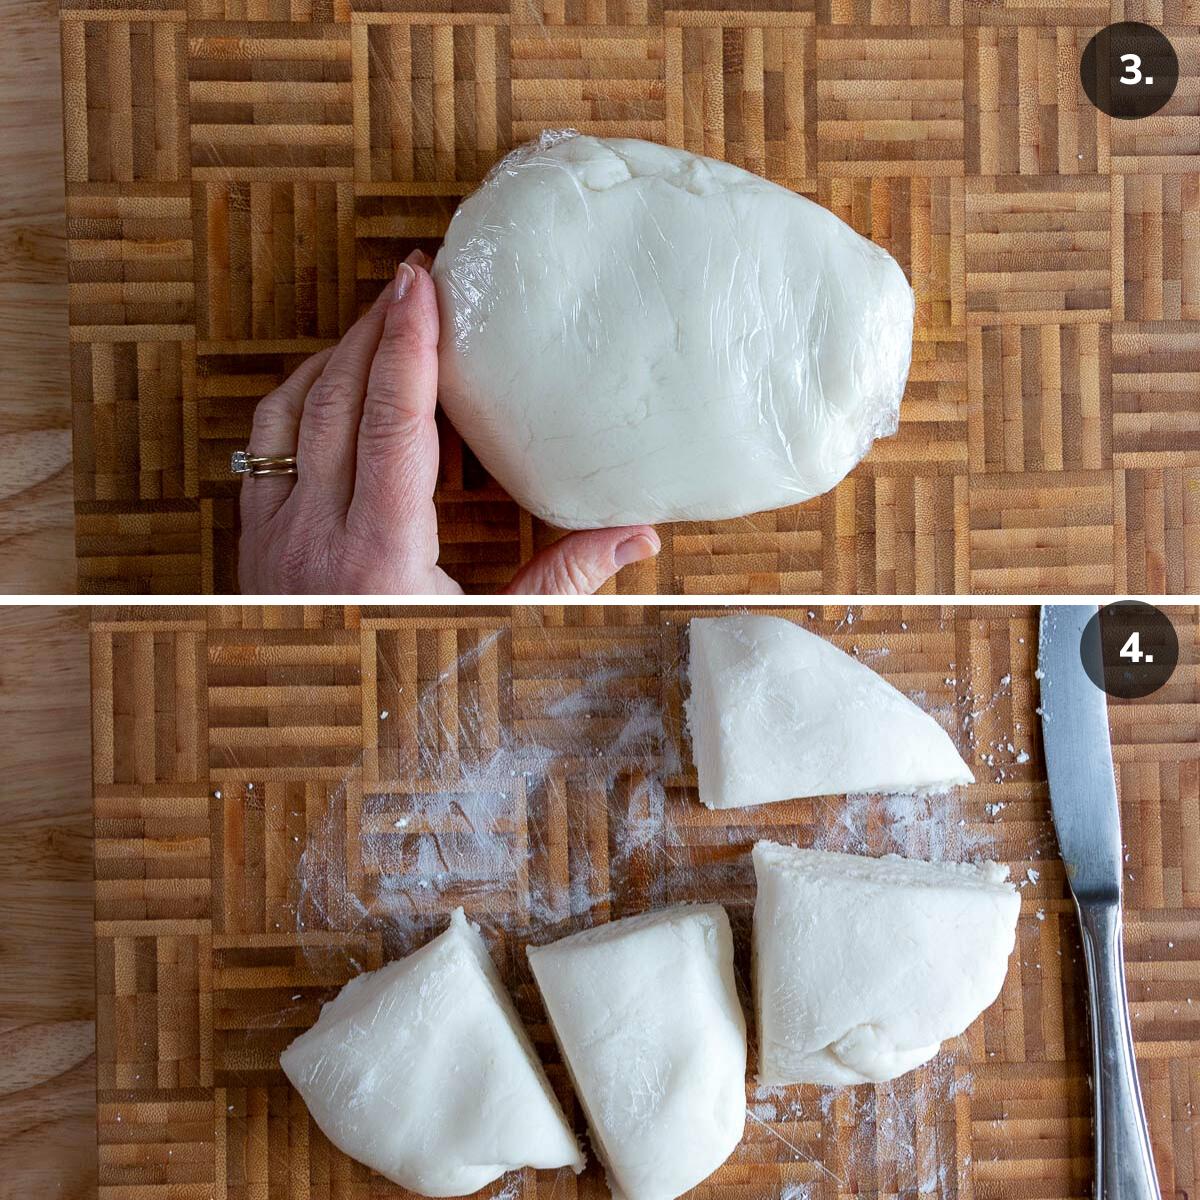 Removing the plastic wrap from the dough and cutting into 4 pieces. 